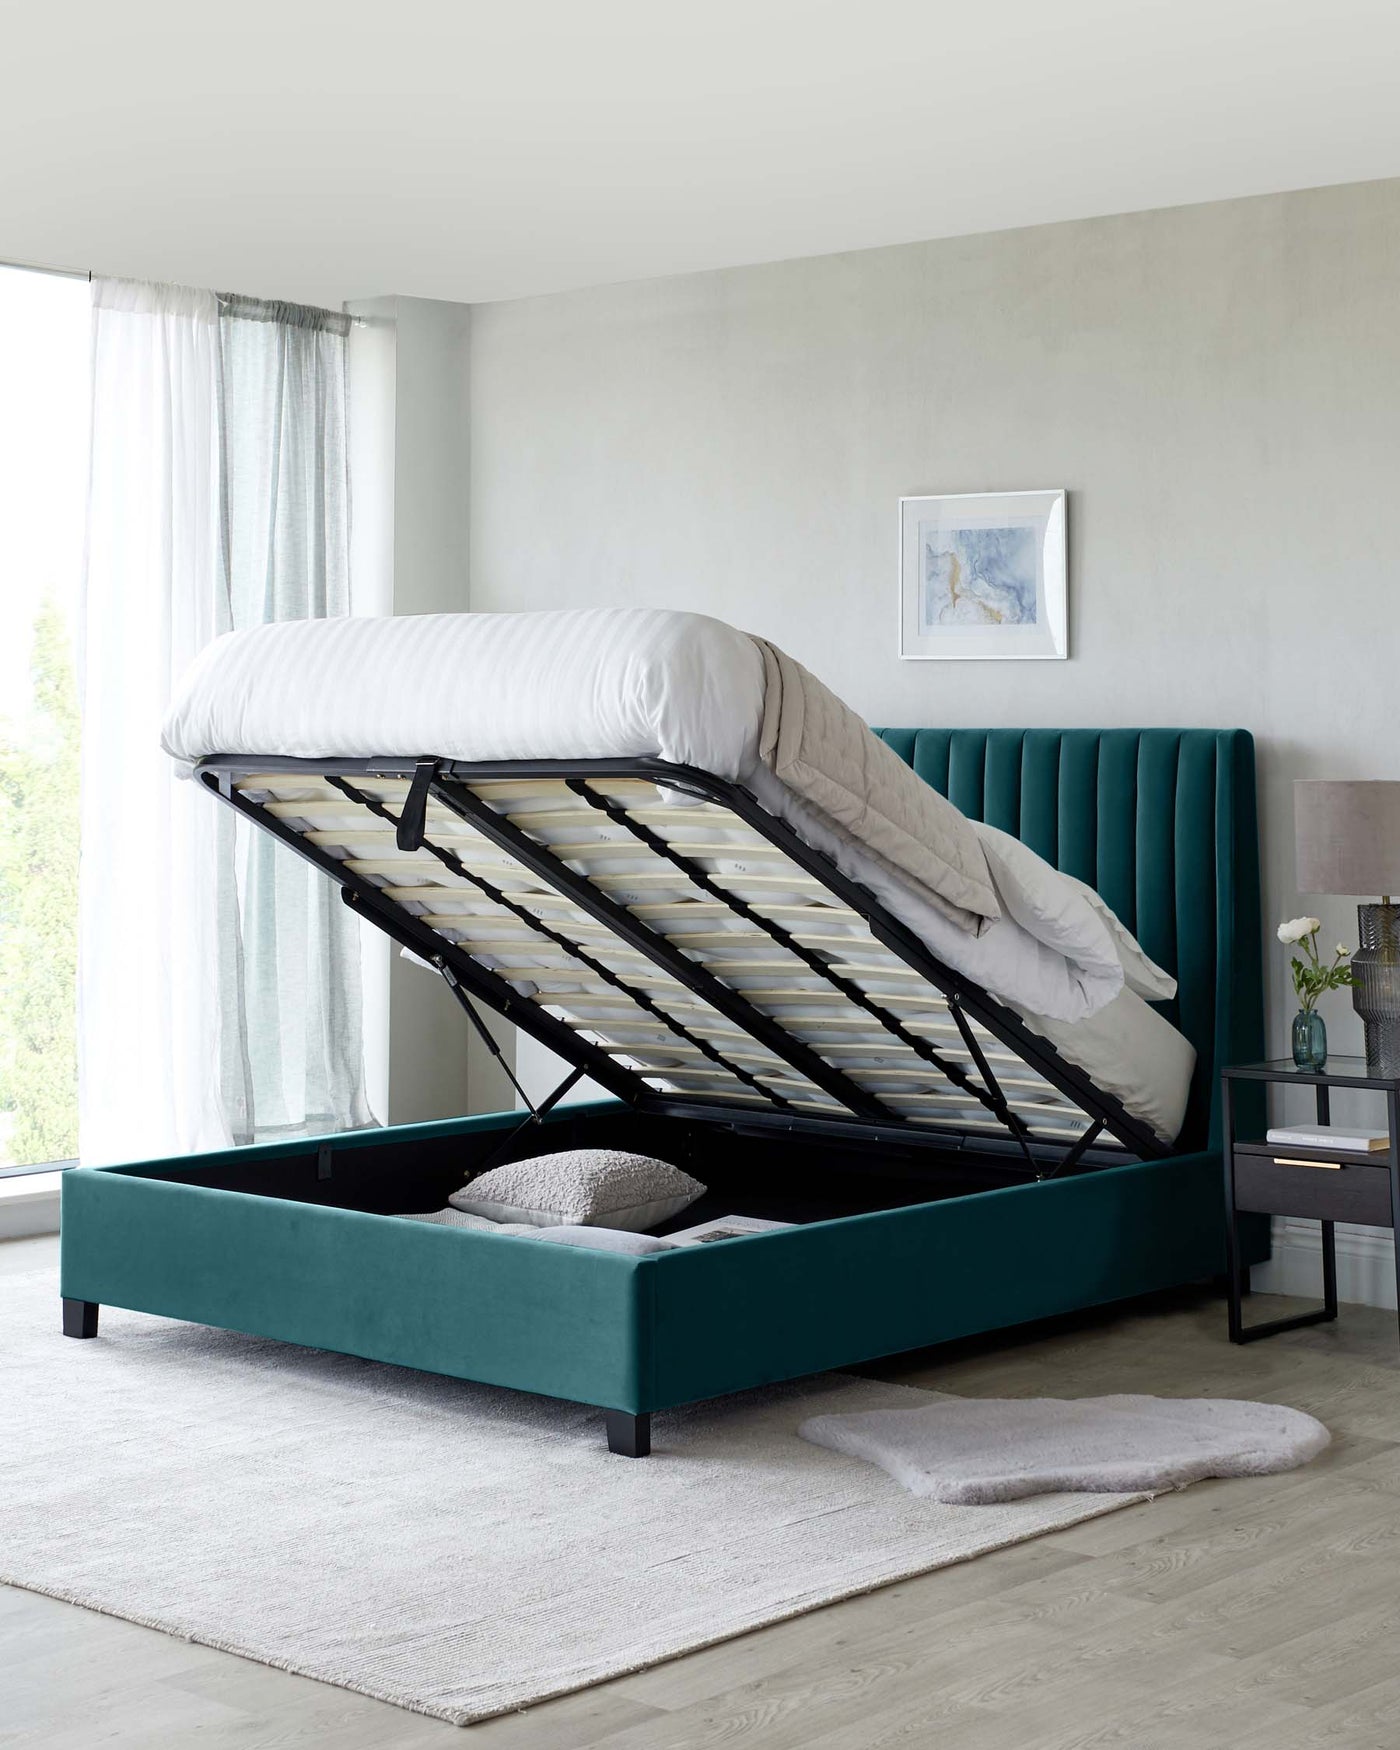 A teal upholstered storage bed with a vertically channel-tufted headboard and a lifted mattress base revealing an open storage compartment. Adjacent is a modern black bedside table with a drawer, shelf, and a white table lamp, all atop a light grey area rug.